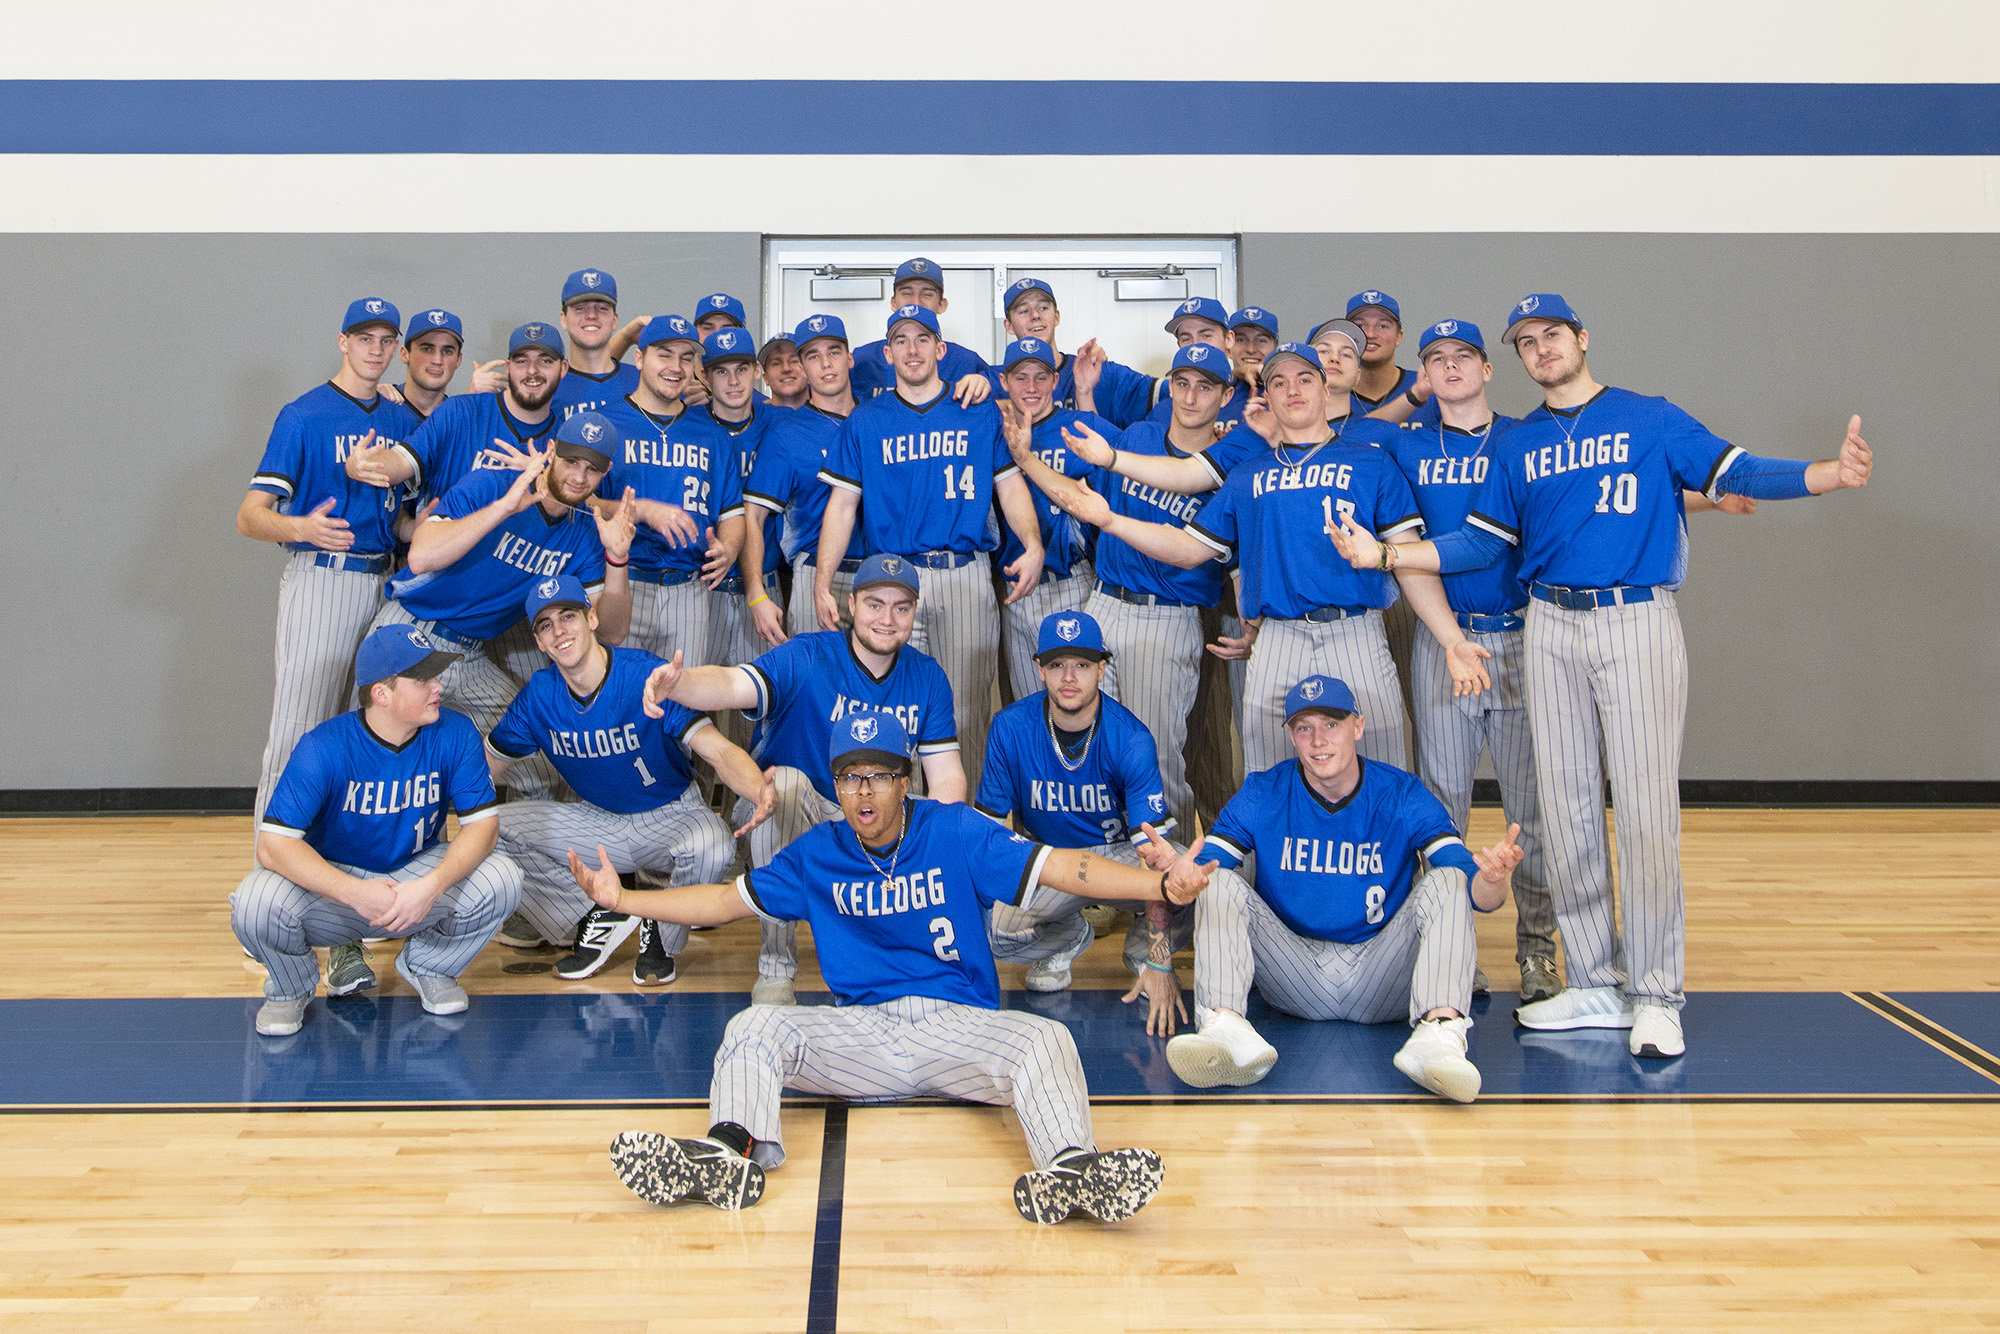 KCC's 2019 baseball team poses for a group photo in the Miller Gym.